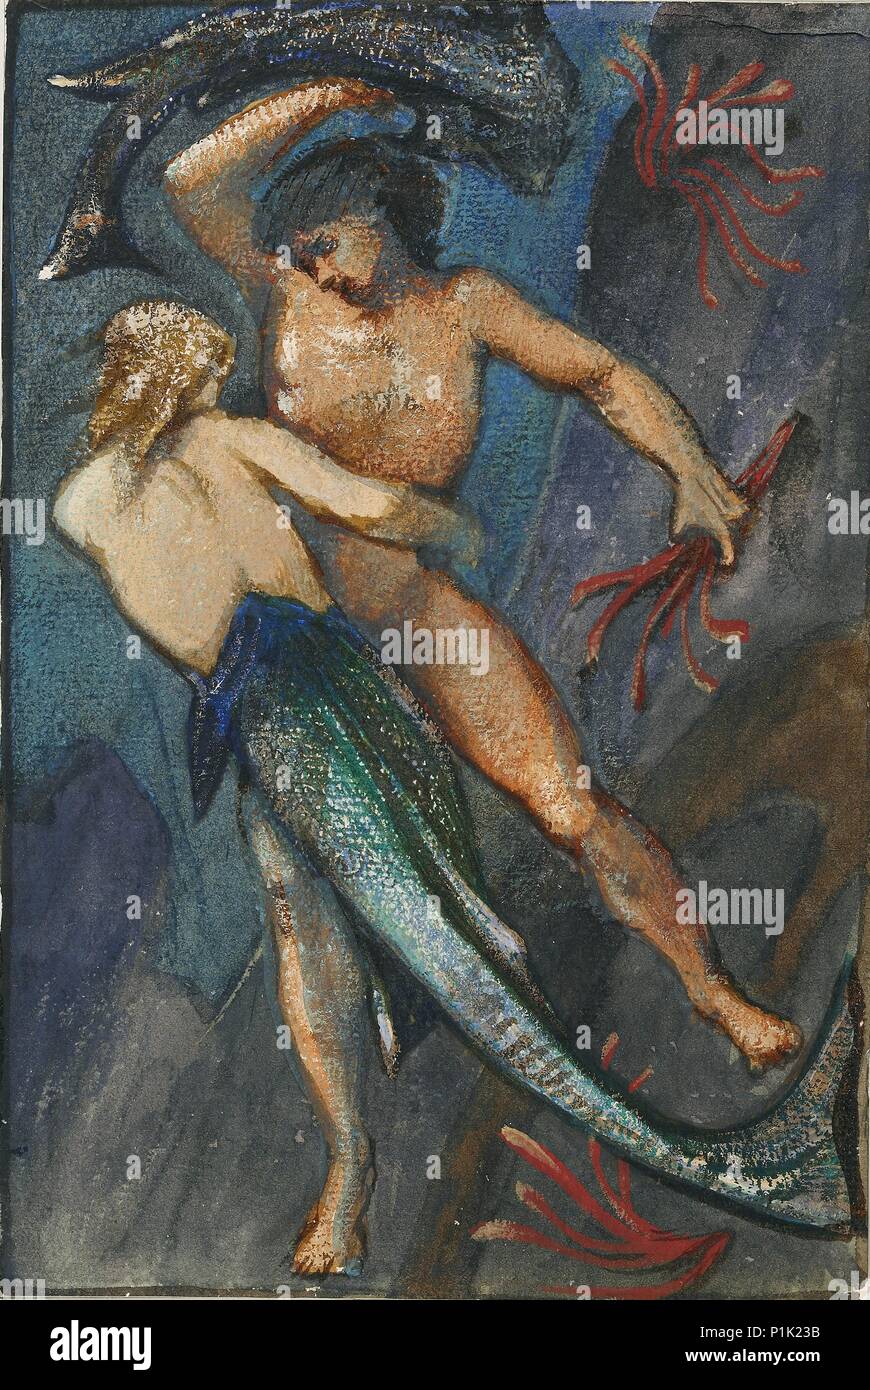 Mermaid and man from Album of forty-eight drawings, c1853-1898. Artist: Sir Edward Coley Burne-Jones. Stock Photo